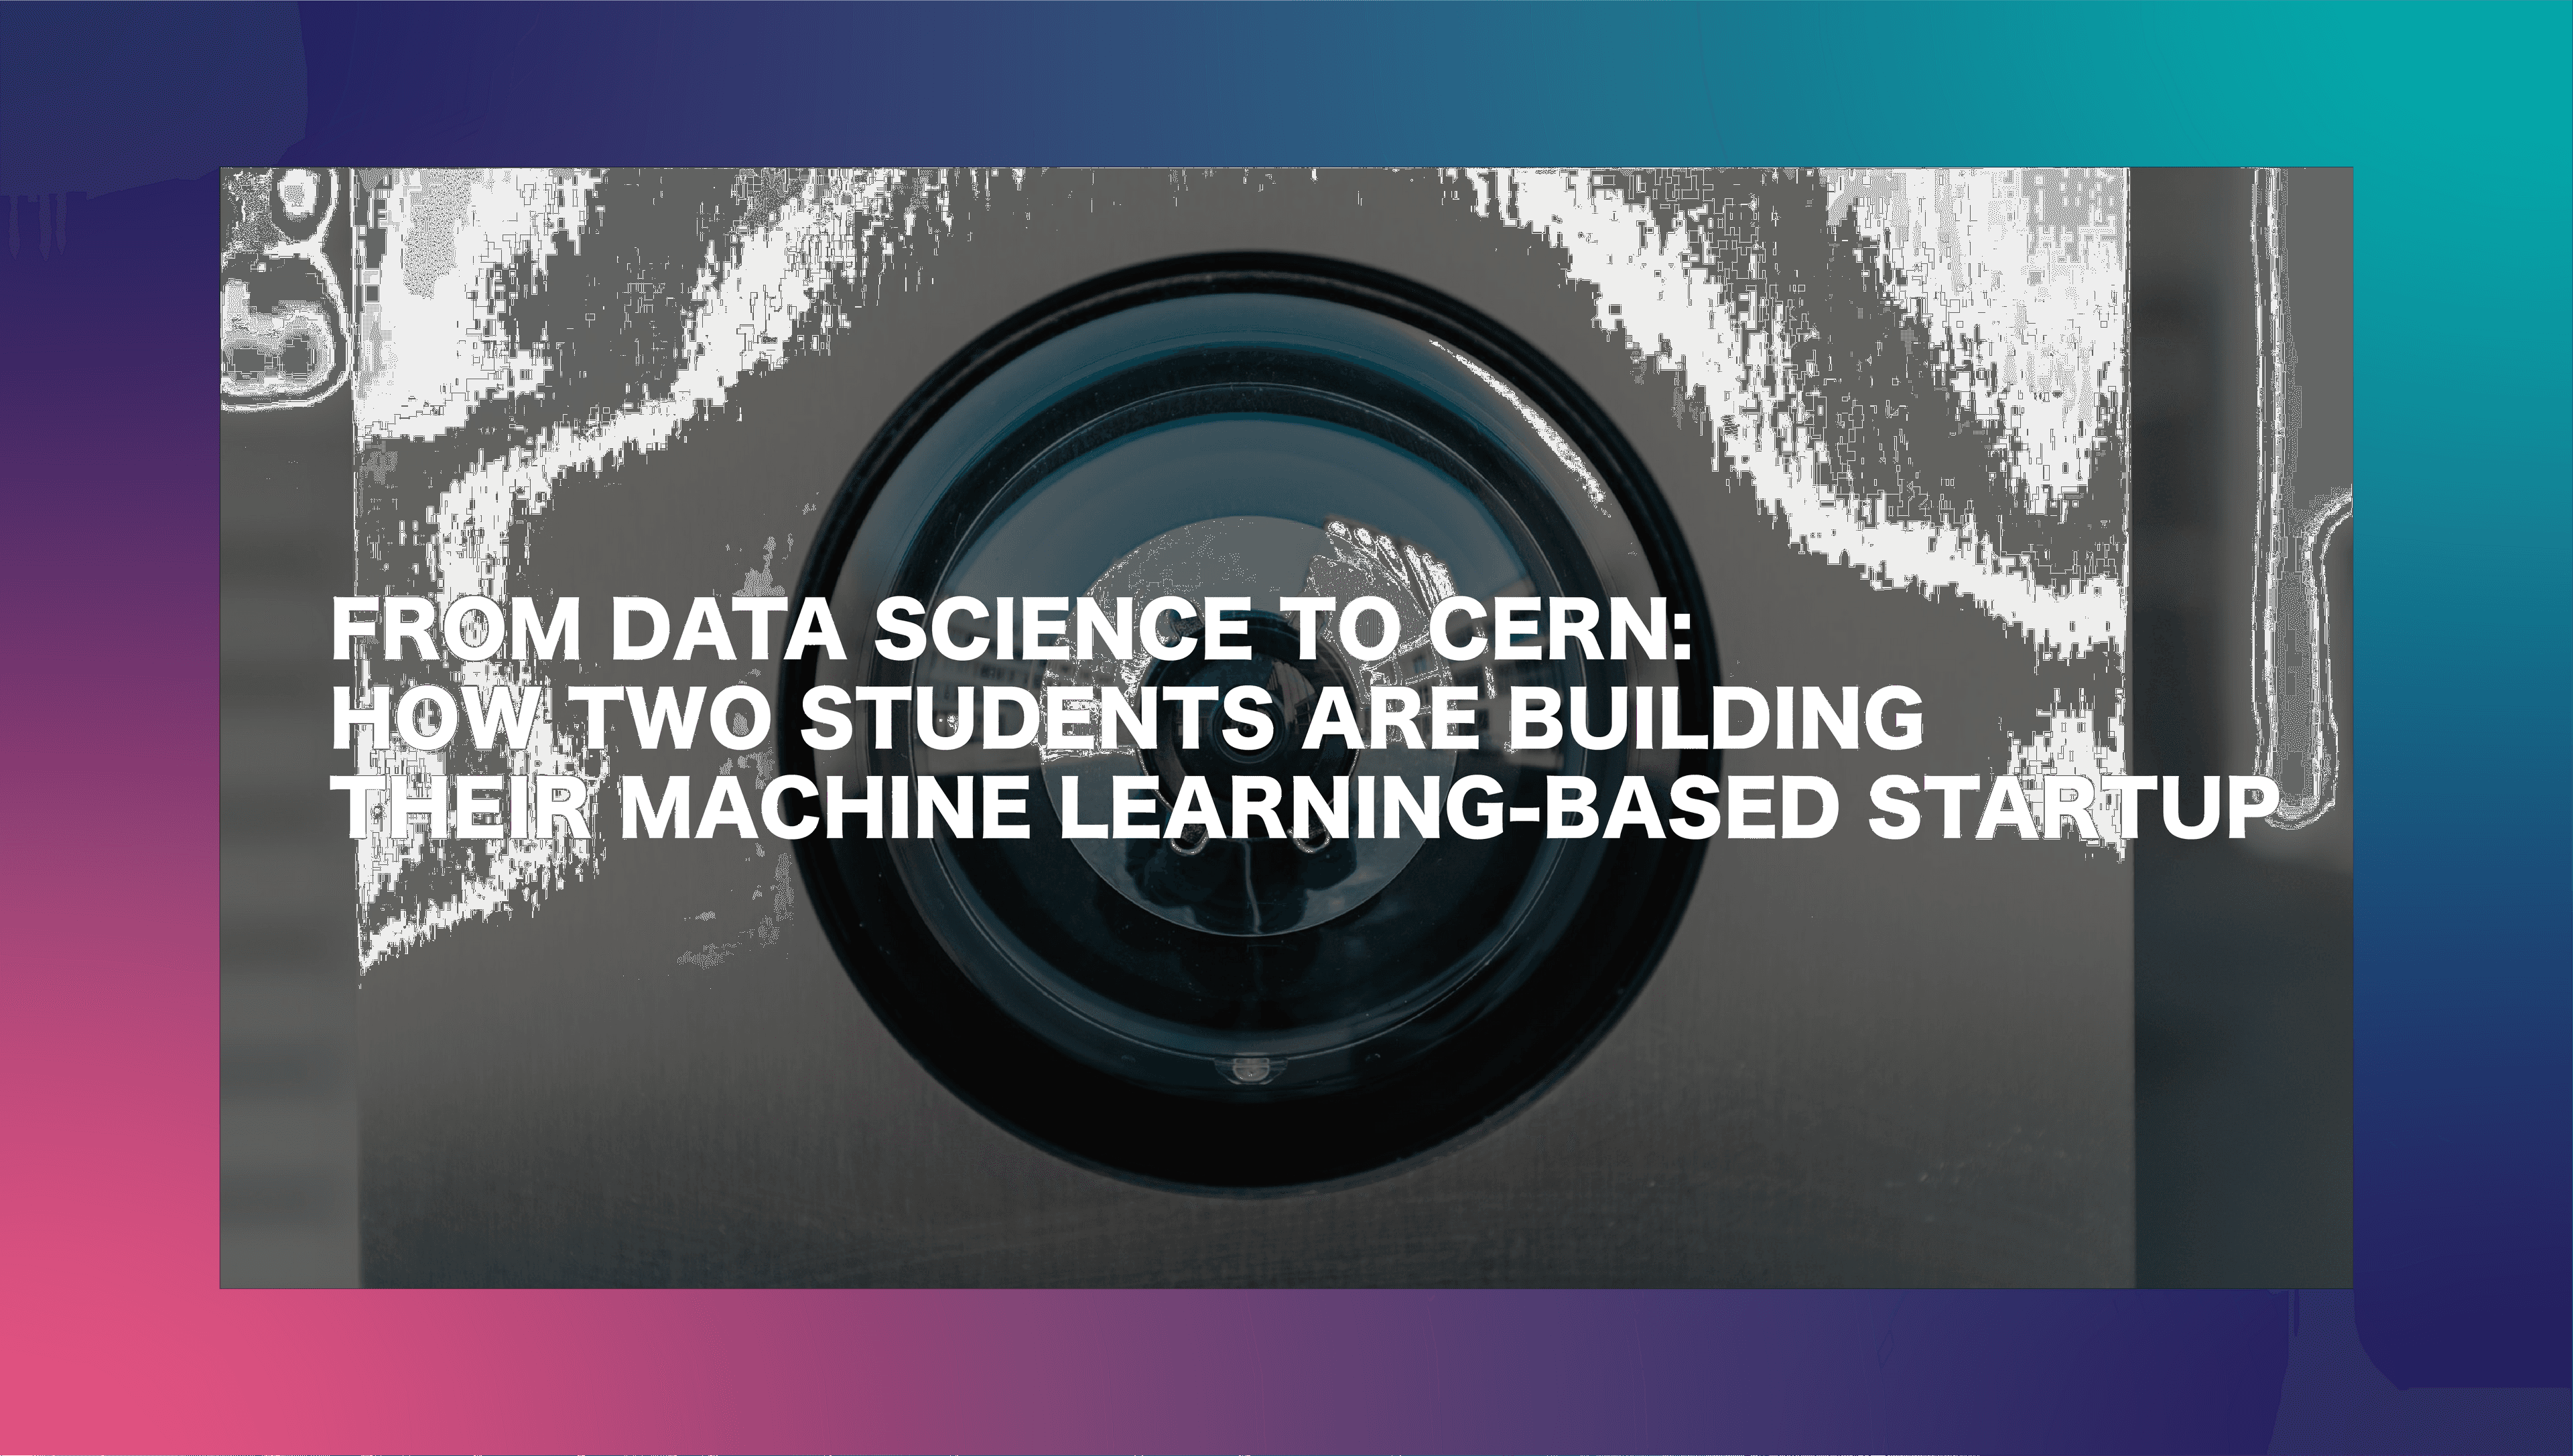 From Data Science to CERN how two students developed their machine learning based startup